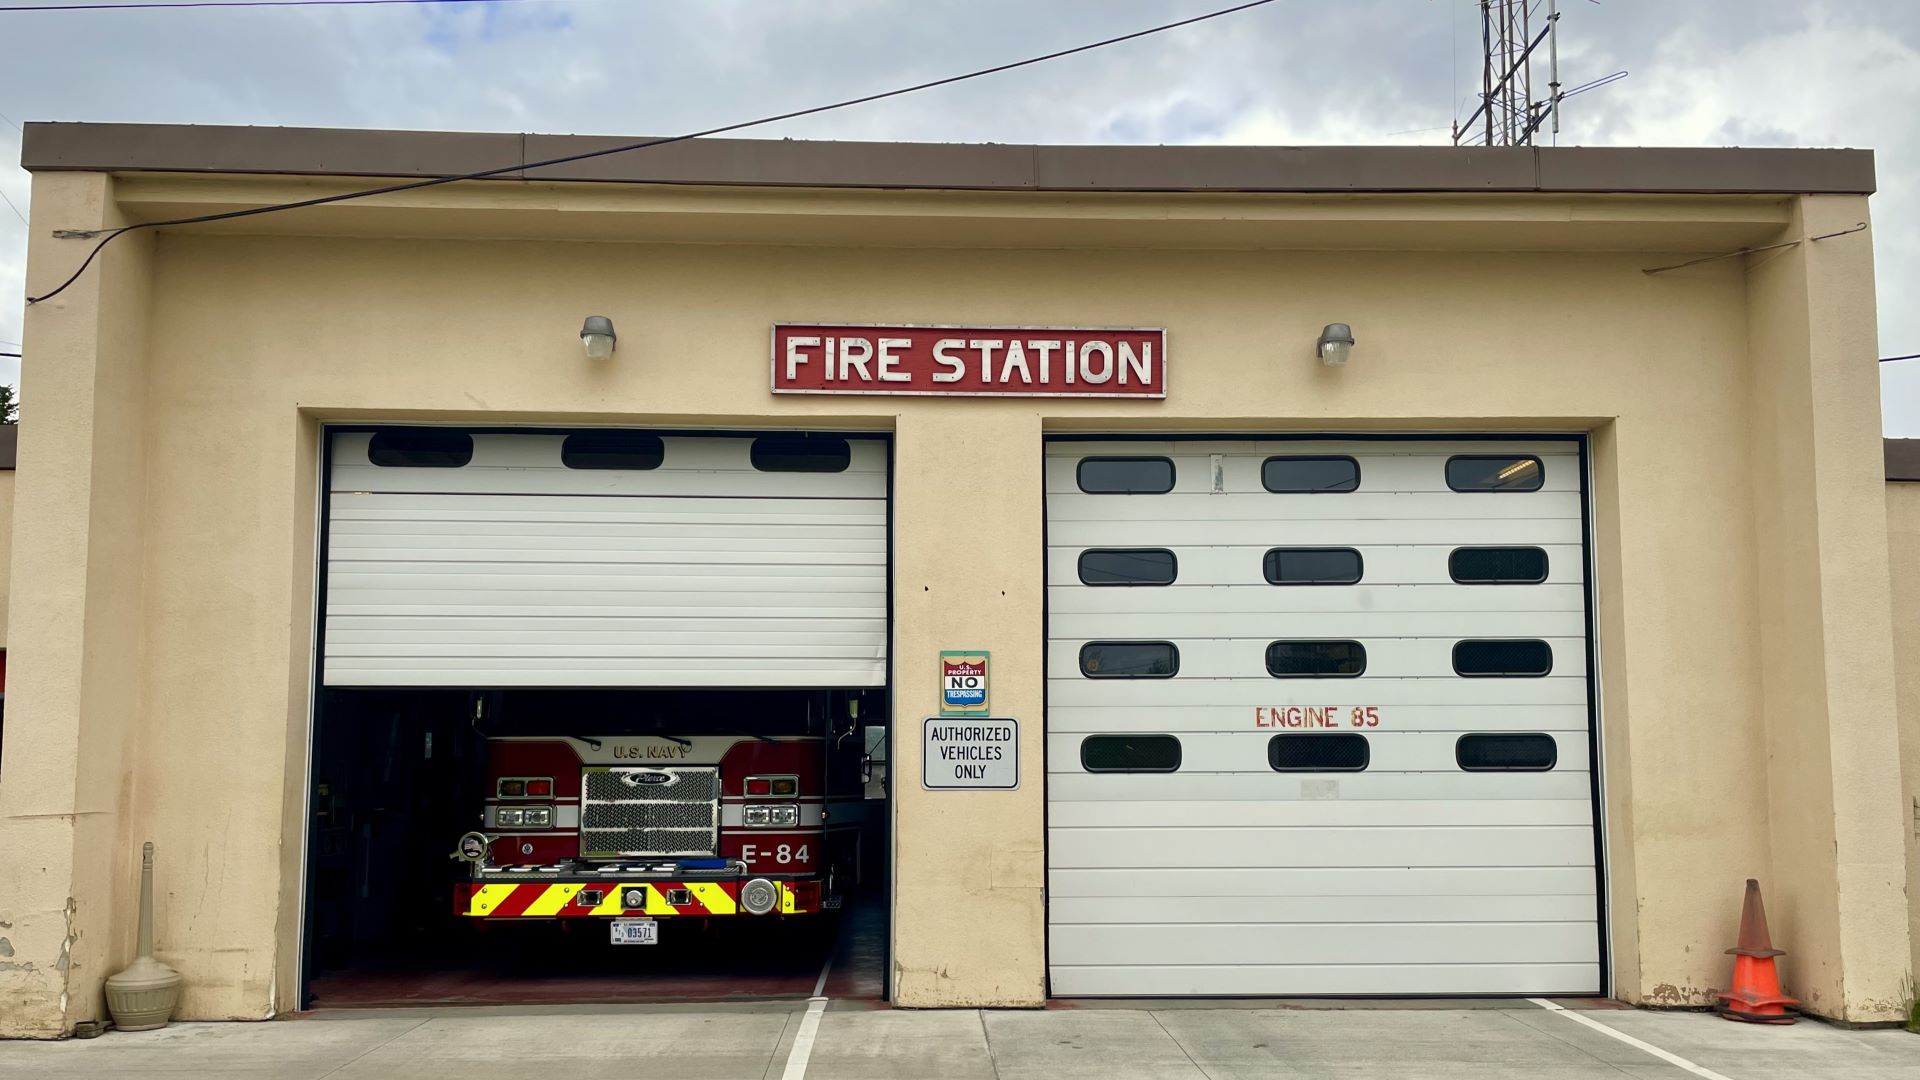 Exterior of the Cutler Fire Station with two doors to truck bays shown. One of the door is partly lifted up to show a fire truck inside the bay.